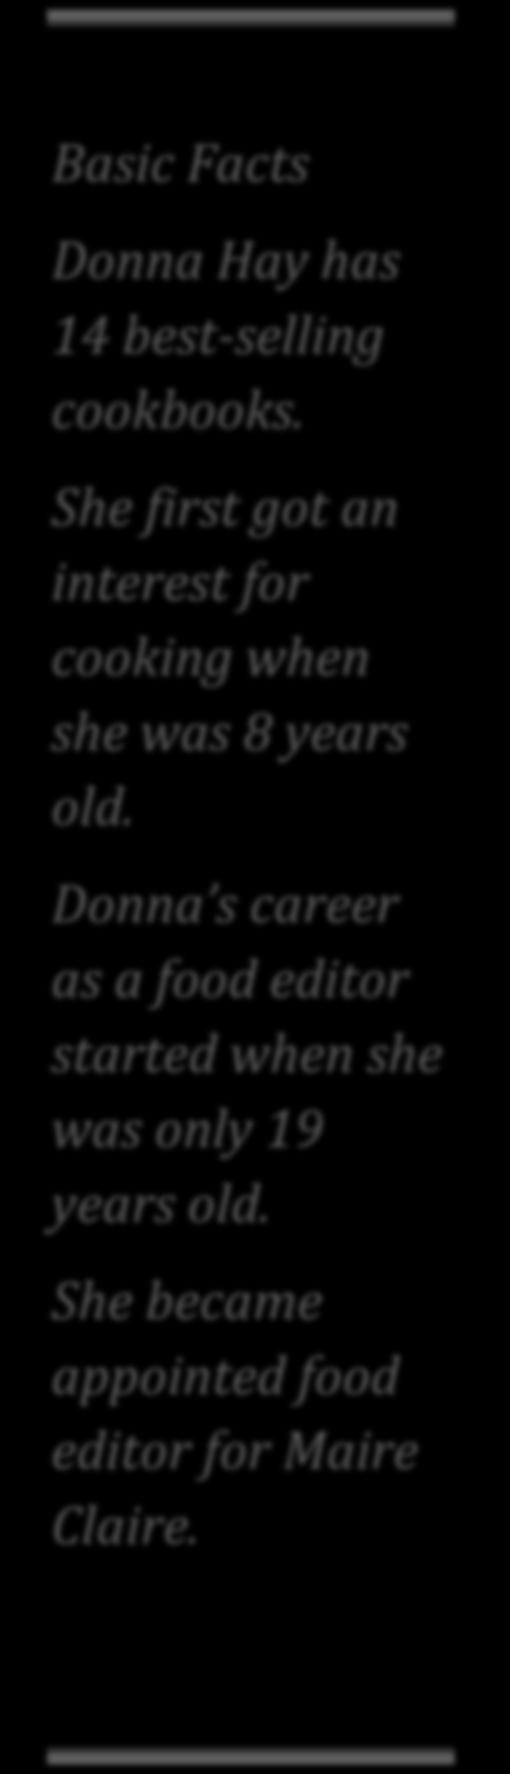 Donna Hay the Australian food stylist, magazine editor, author and mother of two children Angus, 8 and Tom, 5 has done a lot for the cooking world in the past years.